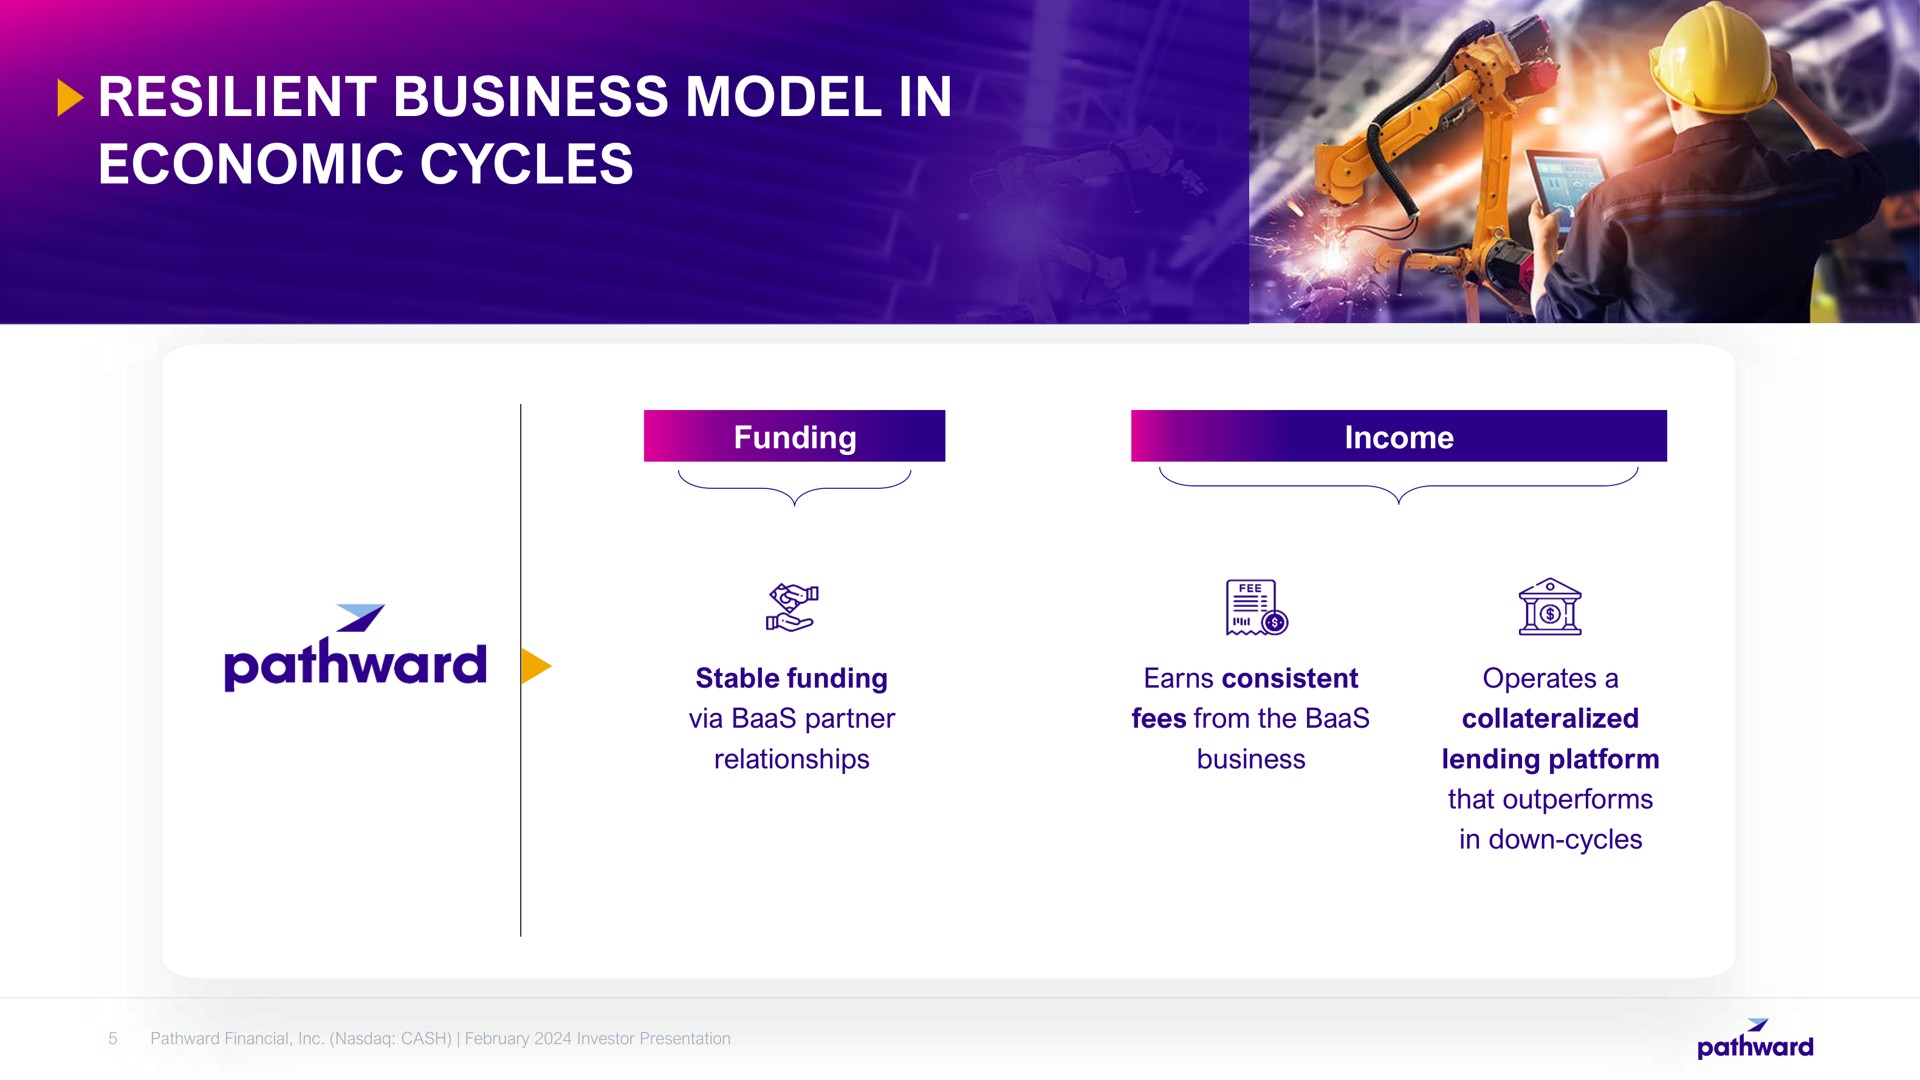 resilient business model in economic cycles | Pathward Financial